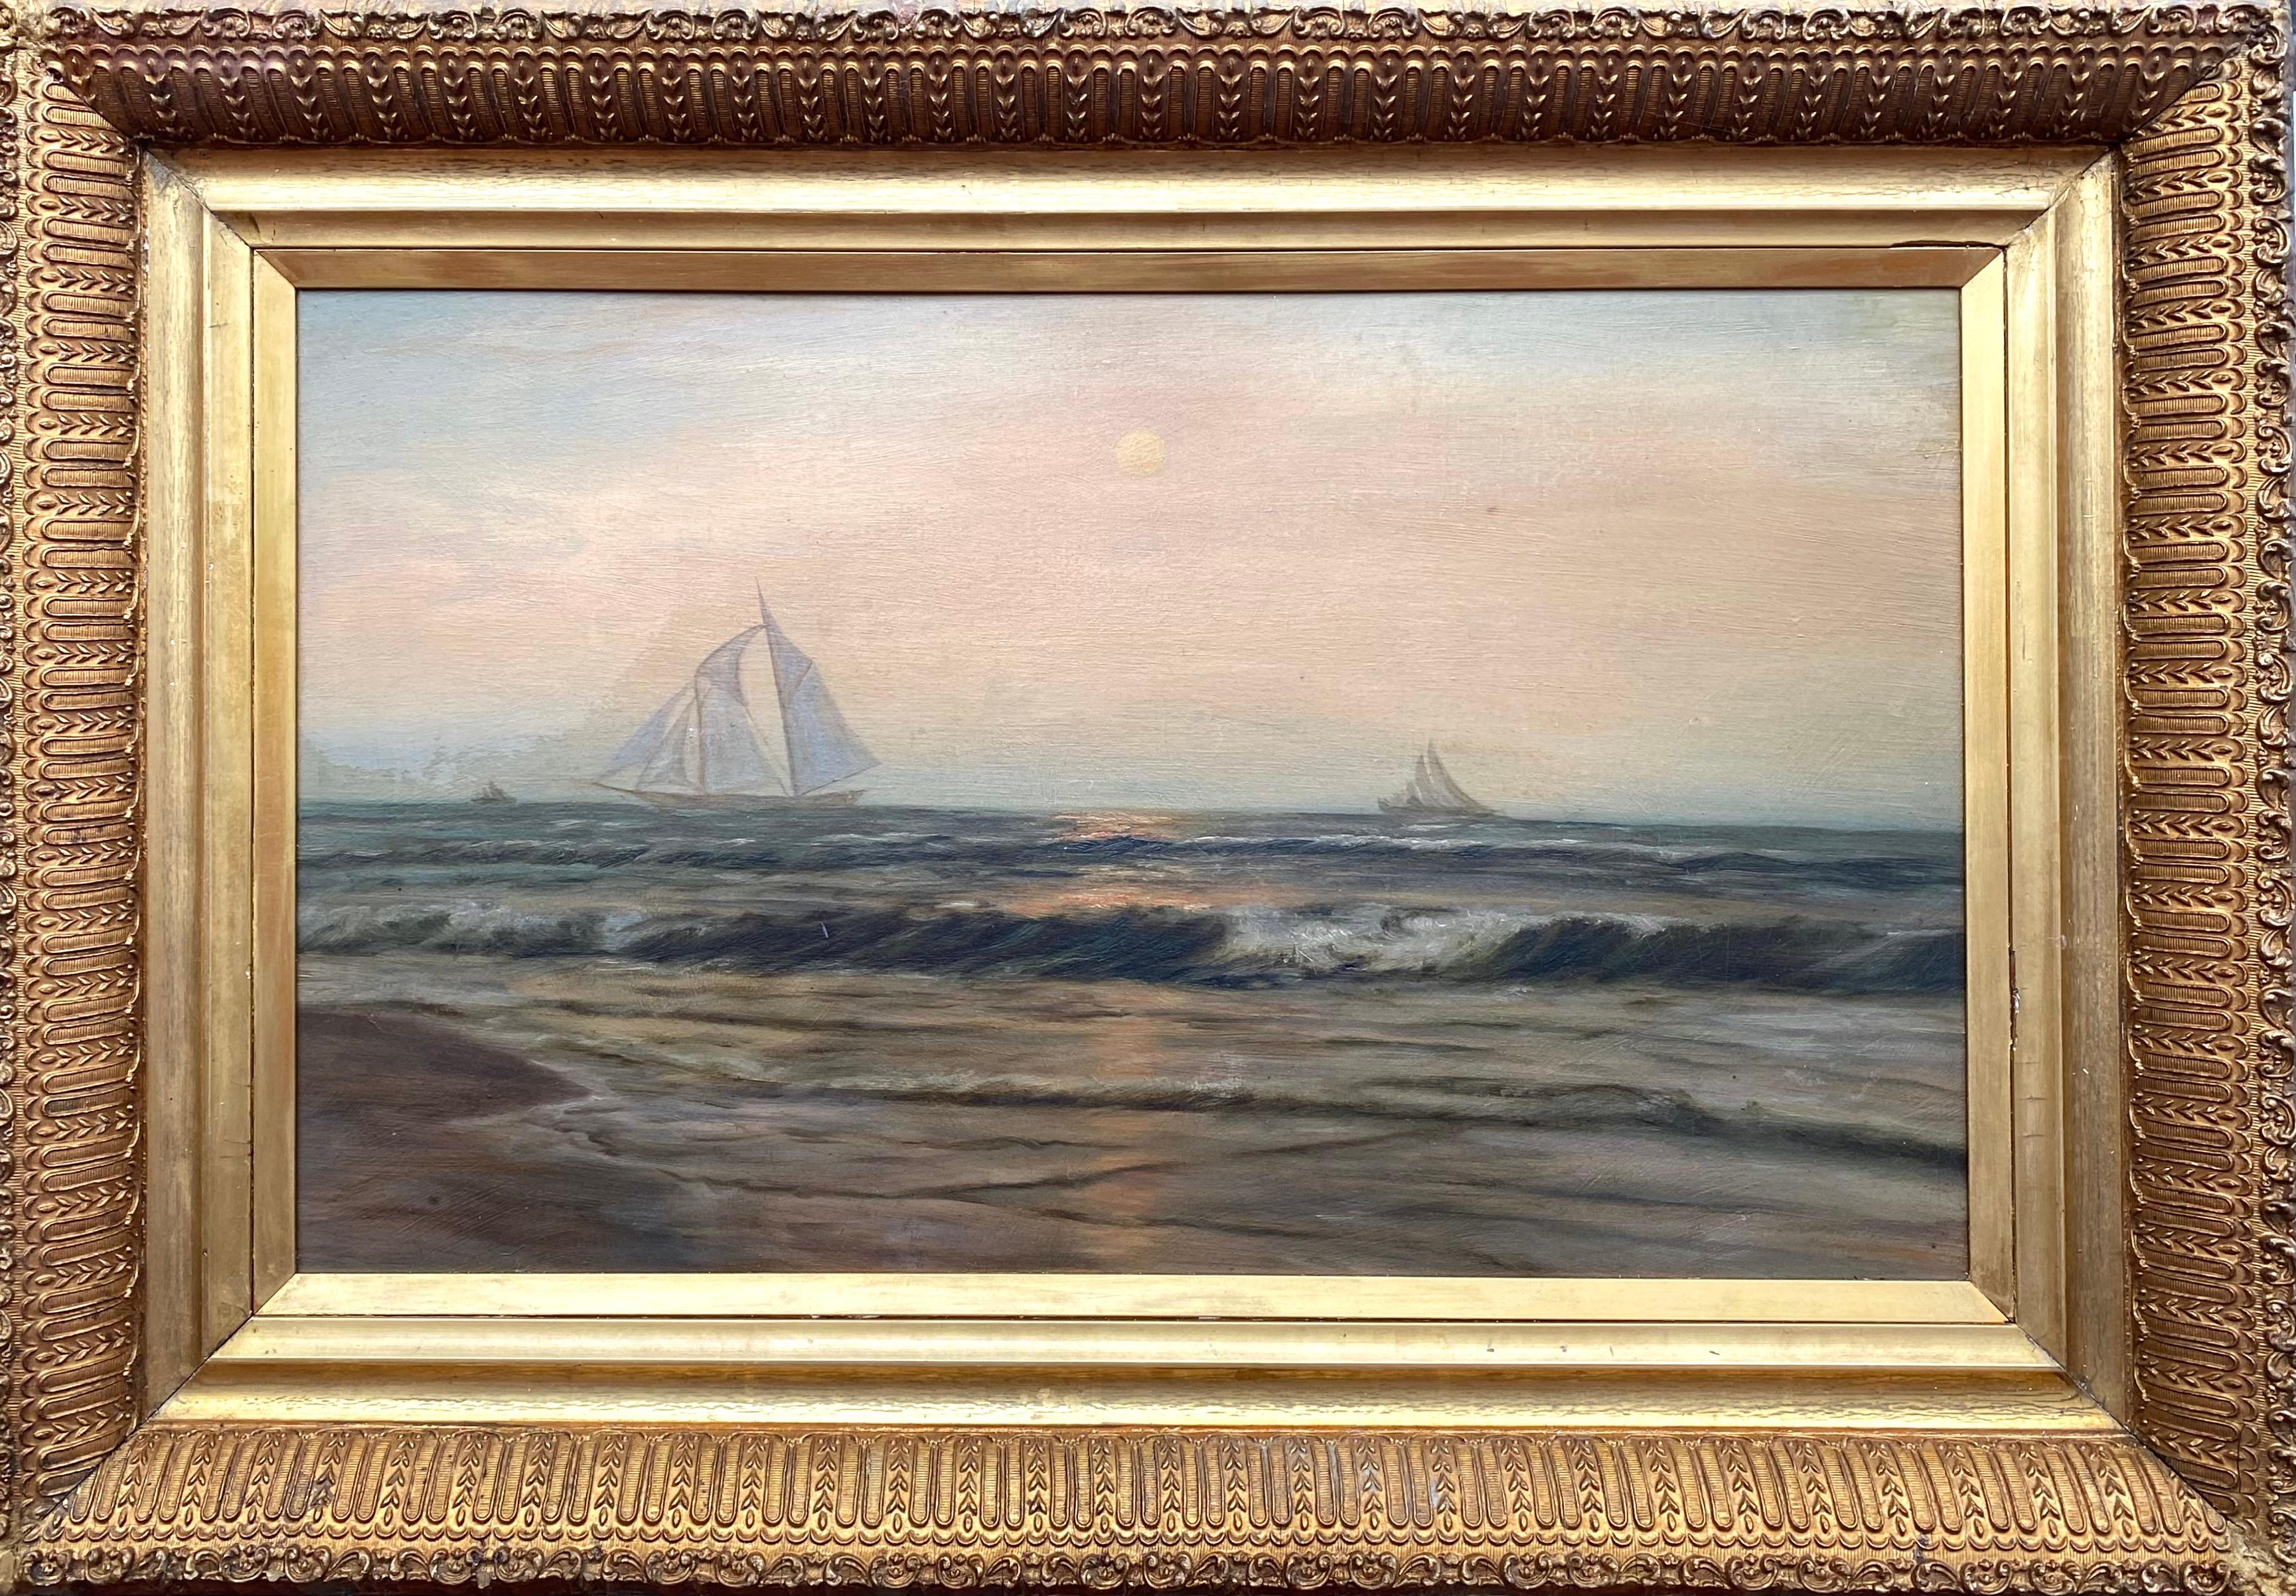 “Sailboats off the Coast” - Painting by Franklin D. Briscoe